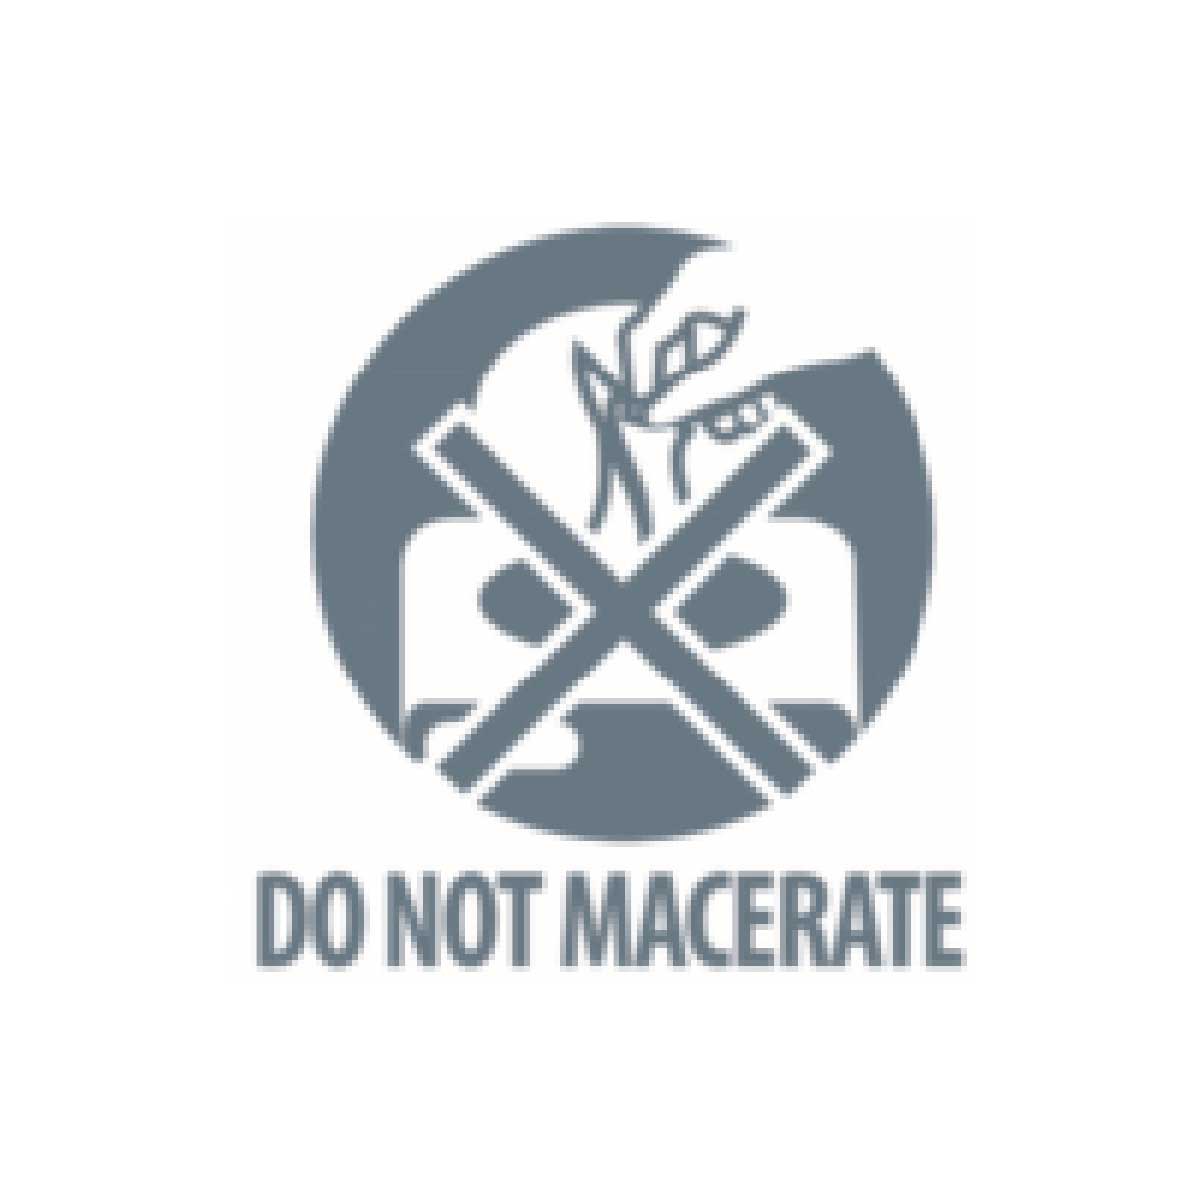 Do not macerate 